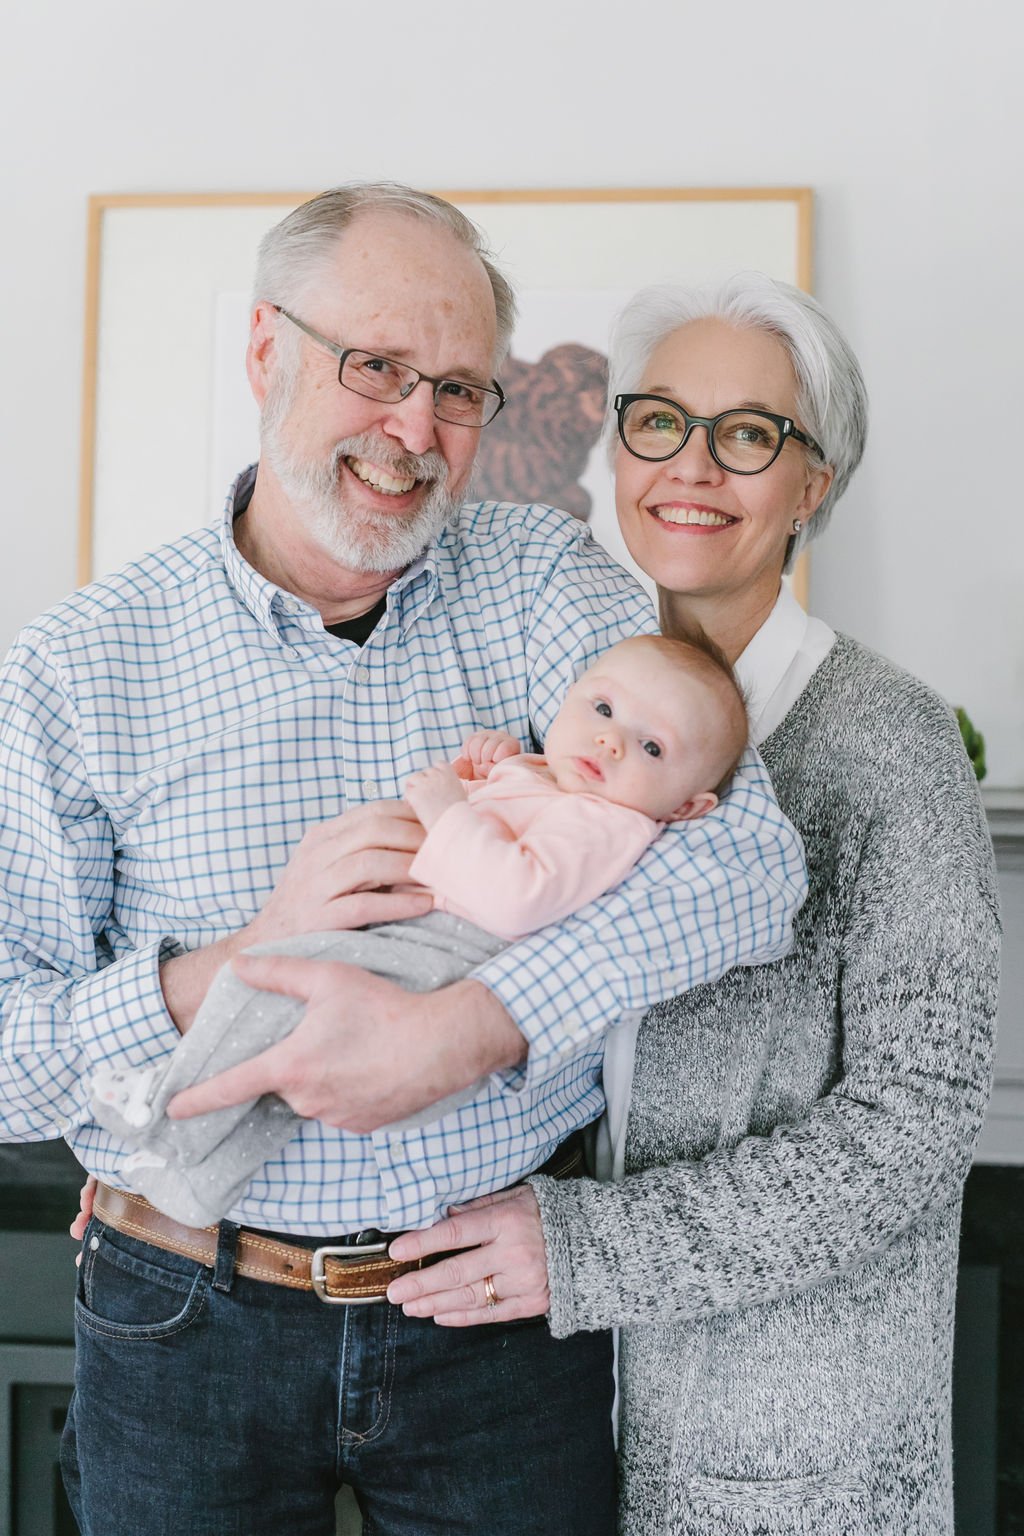 CarrFamilyPhotos2019-emily tebbetts photography-97multi-generational family session intergenerational extended family session documentary day in the life candid connecticut farm in home boston family photographer .jpg